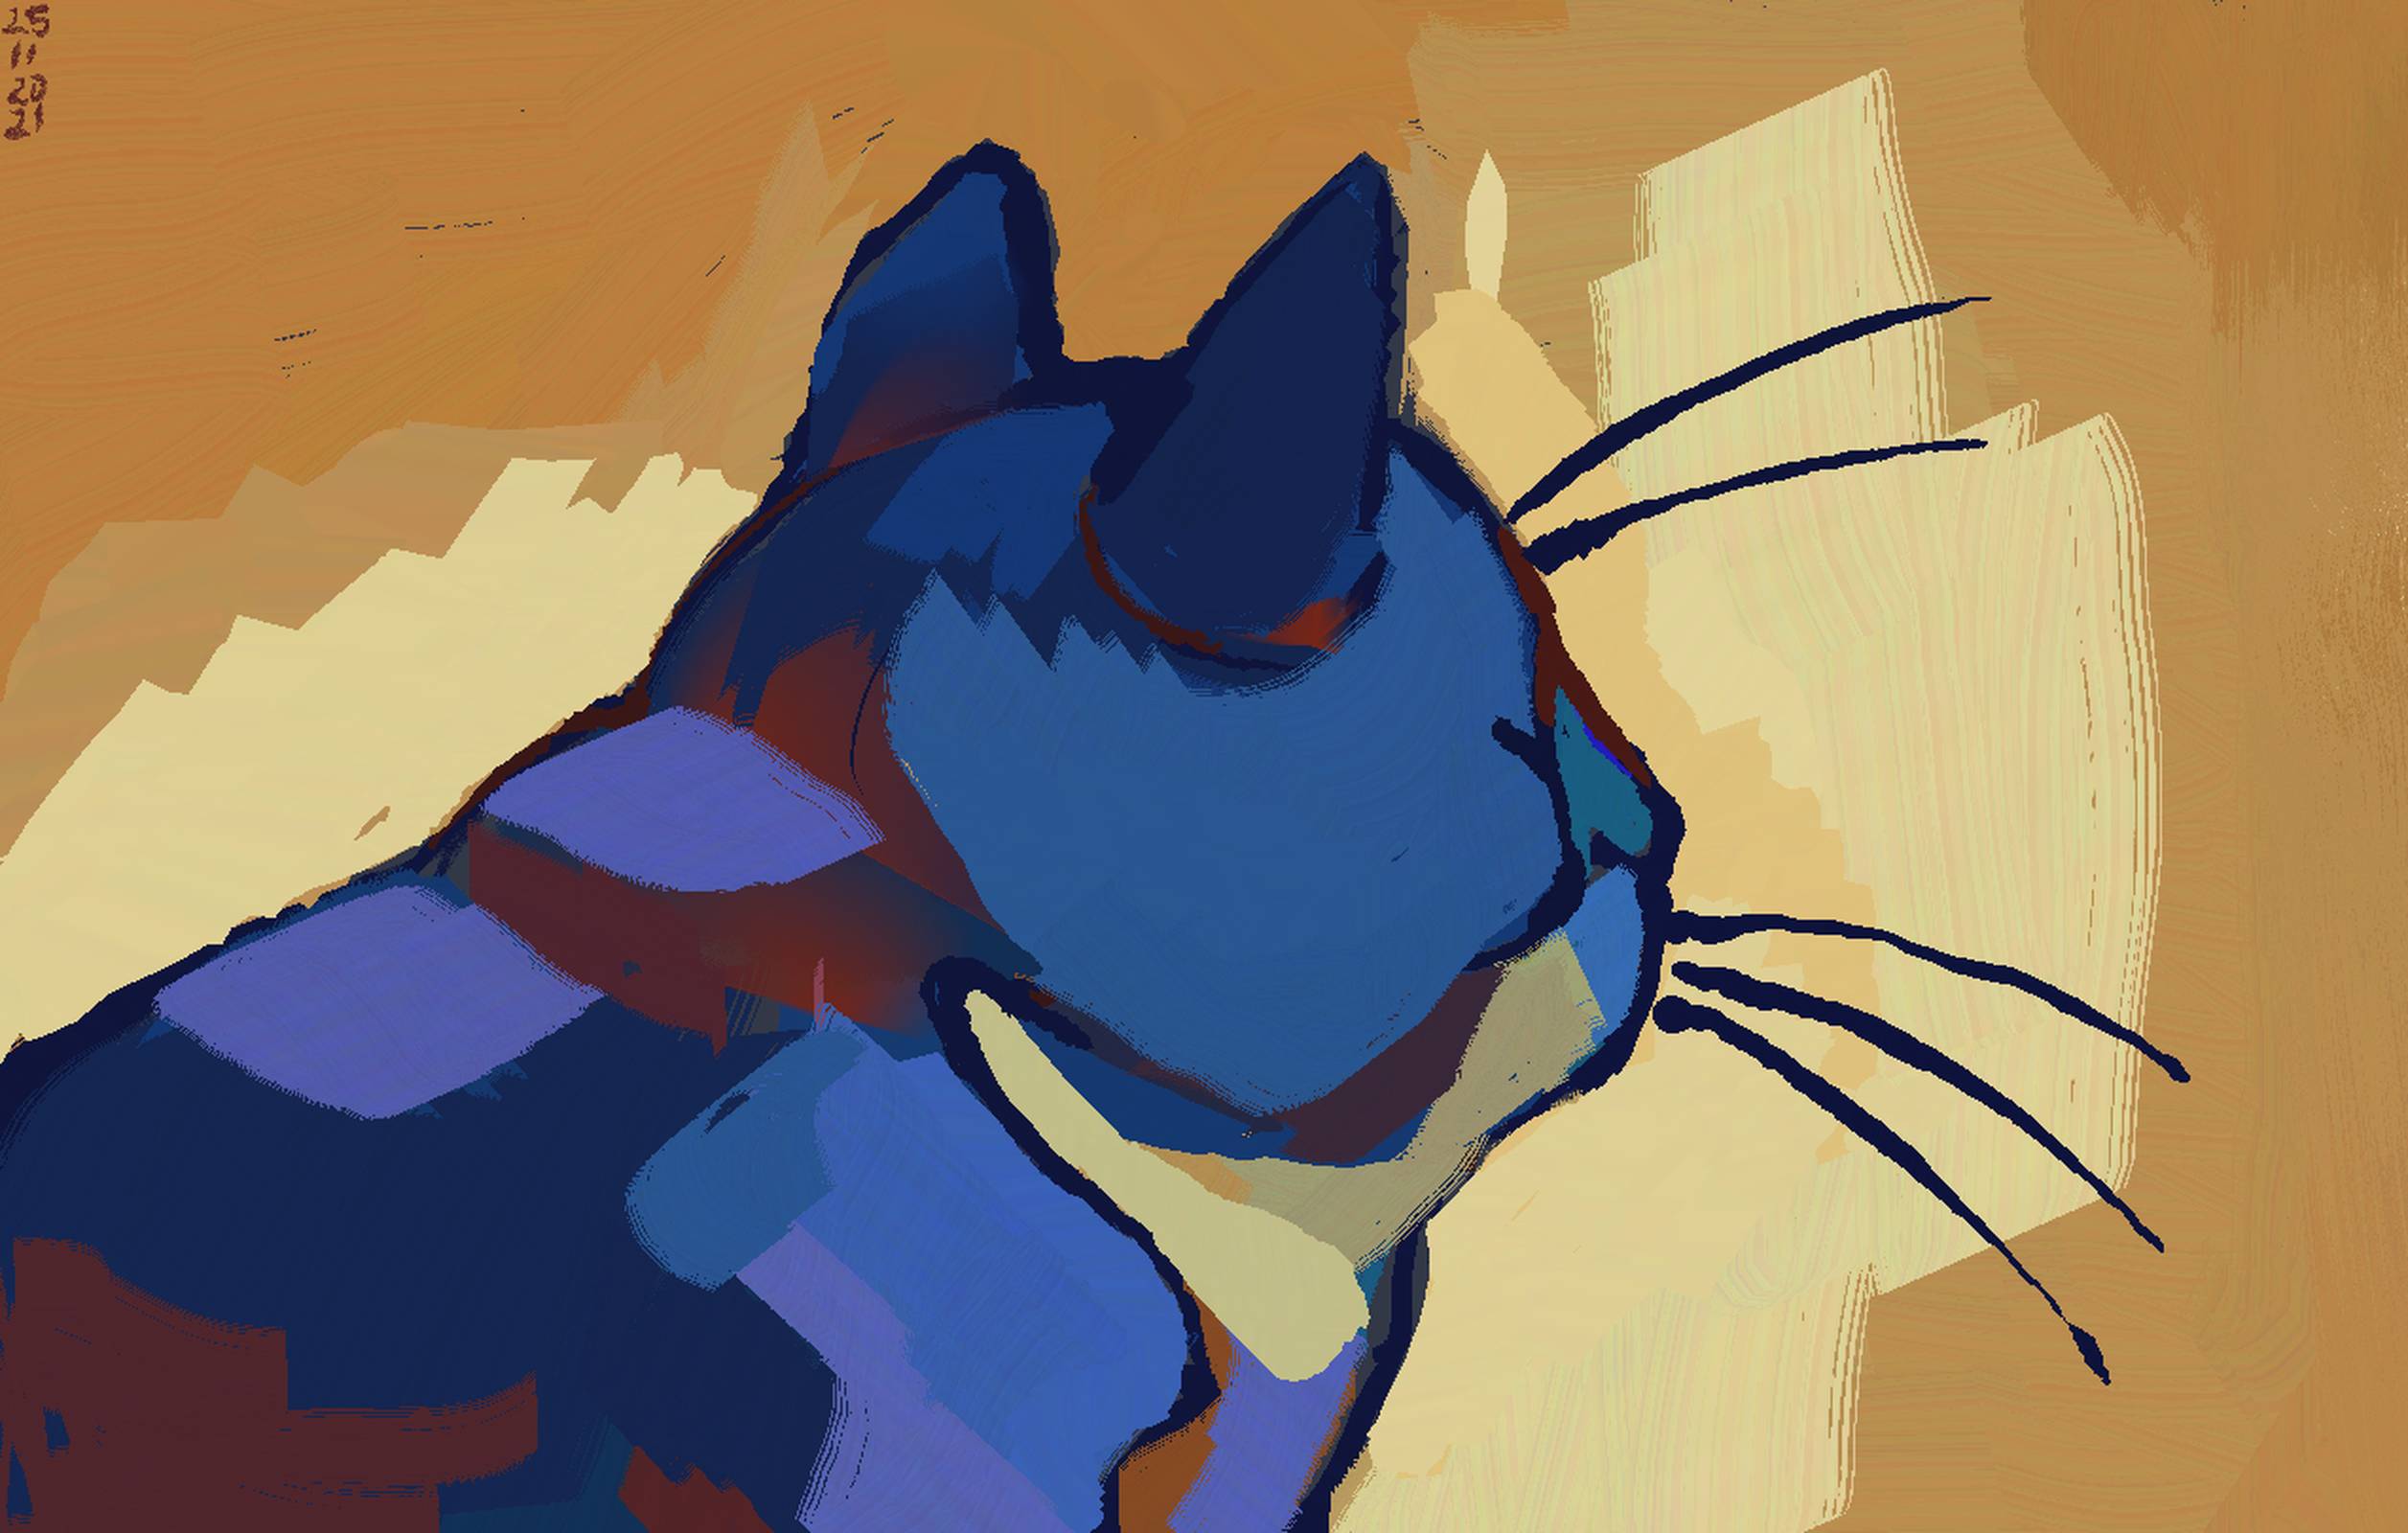 A simple, lined painting of the bust of a cat, facing mostly away, it's head turned slightly so one closed eye and the snout is visible. The cat is blue, with red and yellow accents, the background bright yellow and orange. The style is vaguely expressionistic. The cat looks chill                        